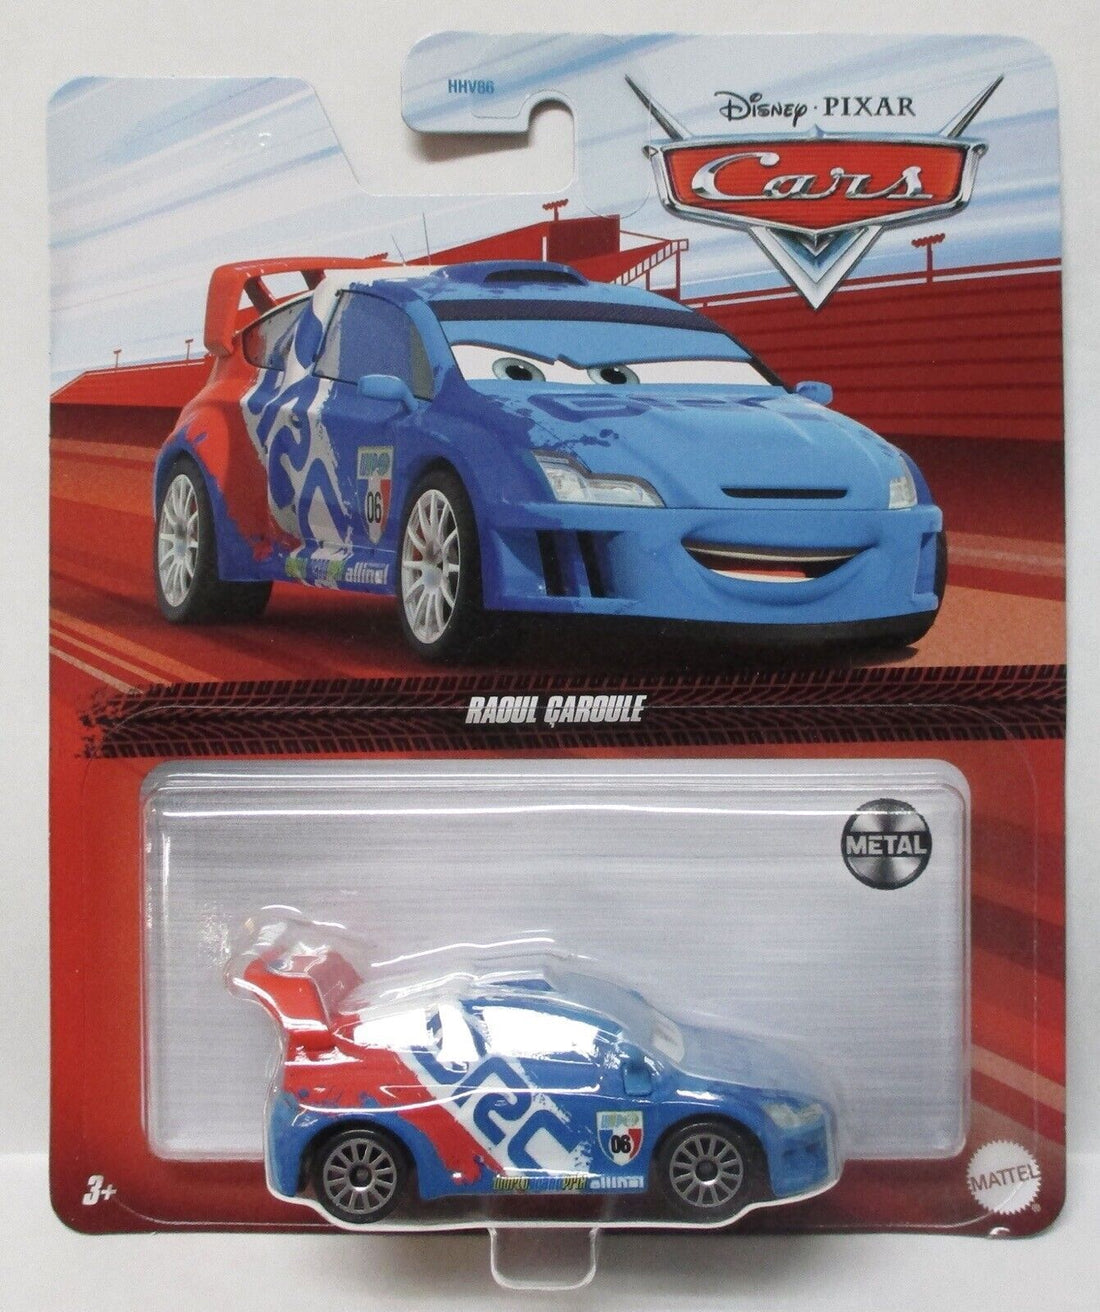 "Disney Pixar Cars Toy Collection: 1:55 Scale - Unleash the Speed and Adventure! - RAOUL CAROULE (2022)